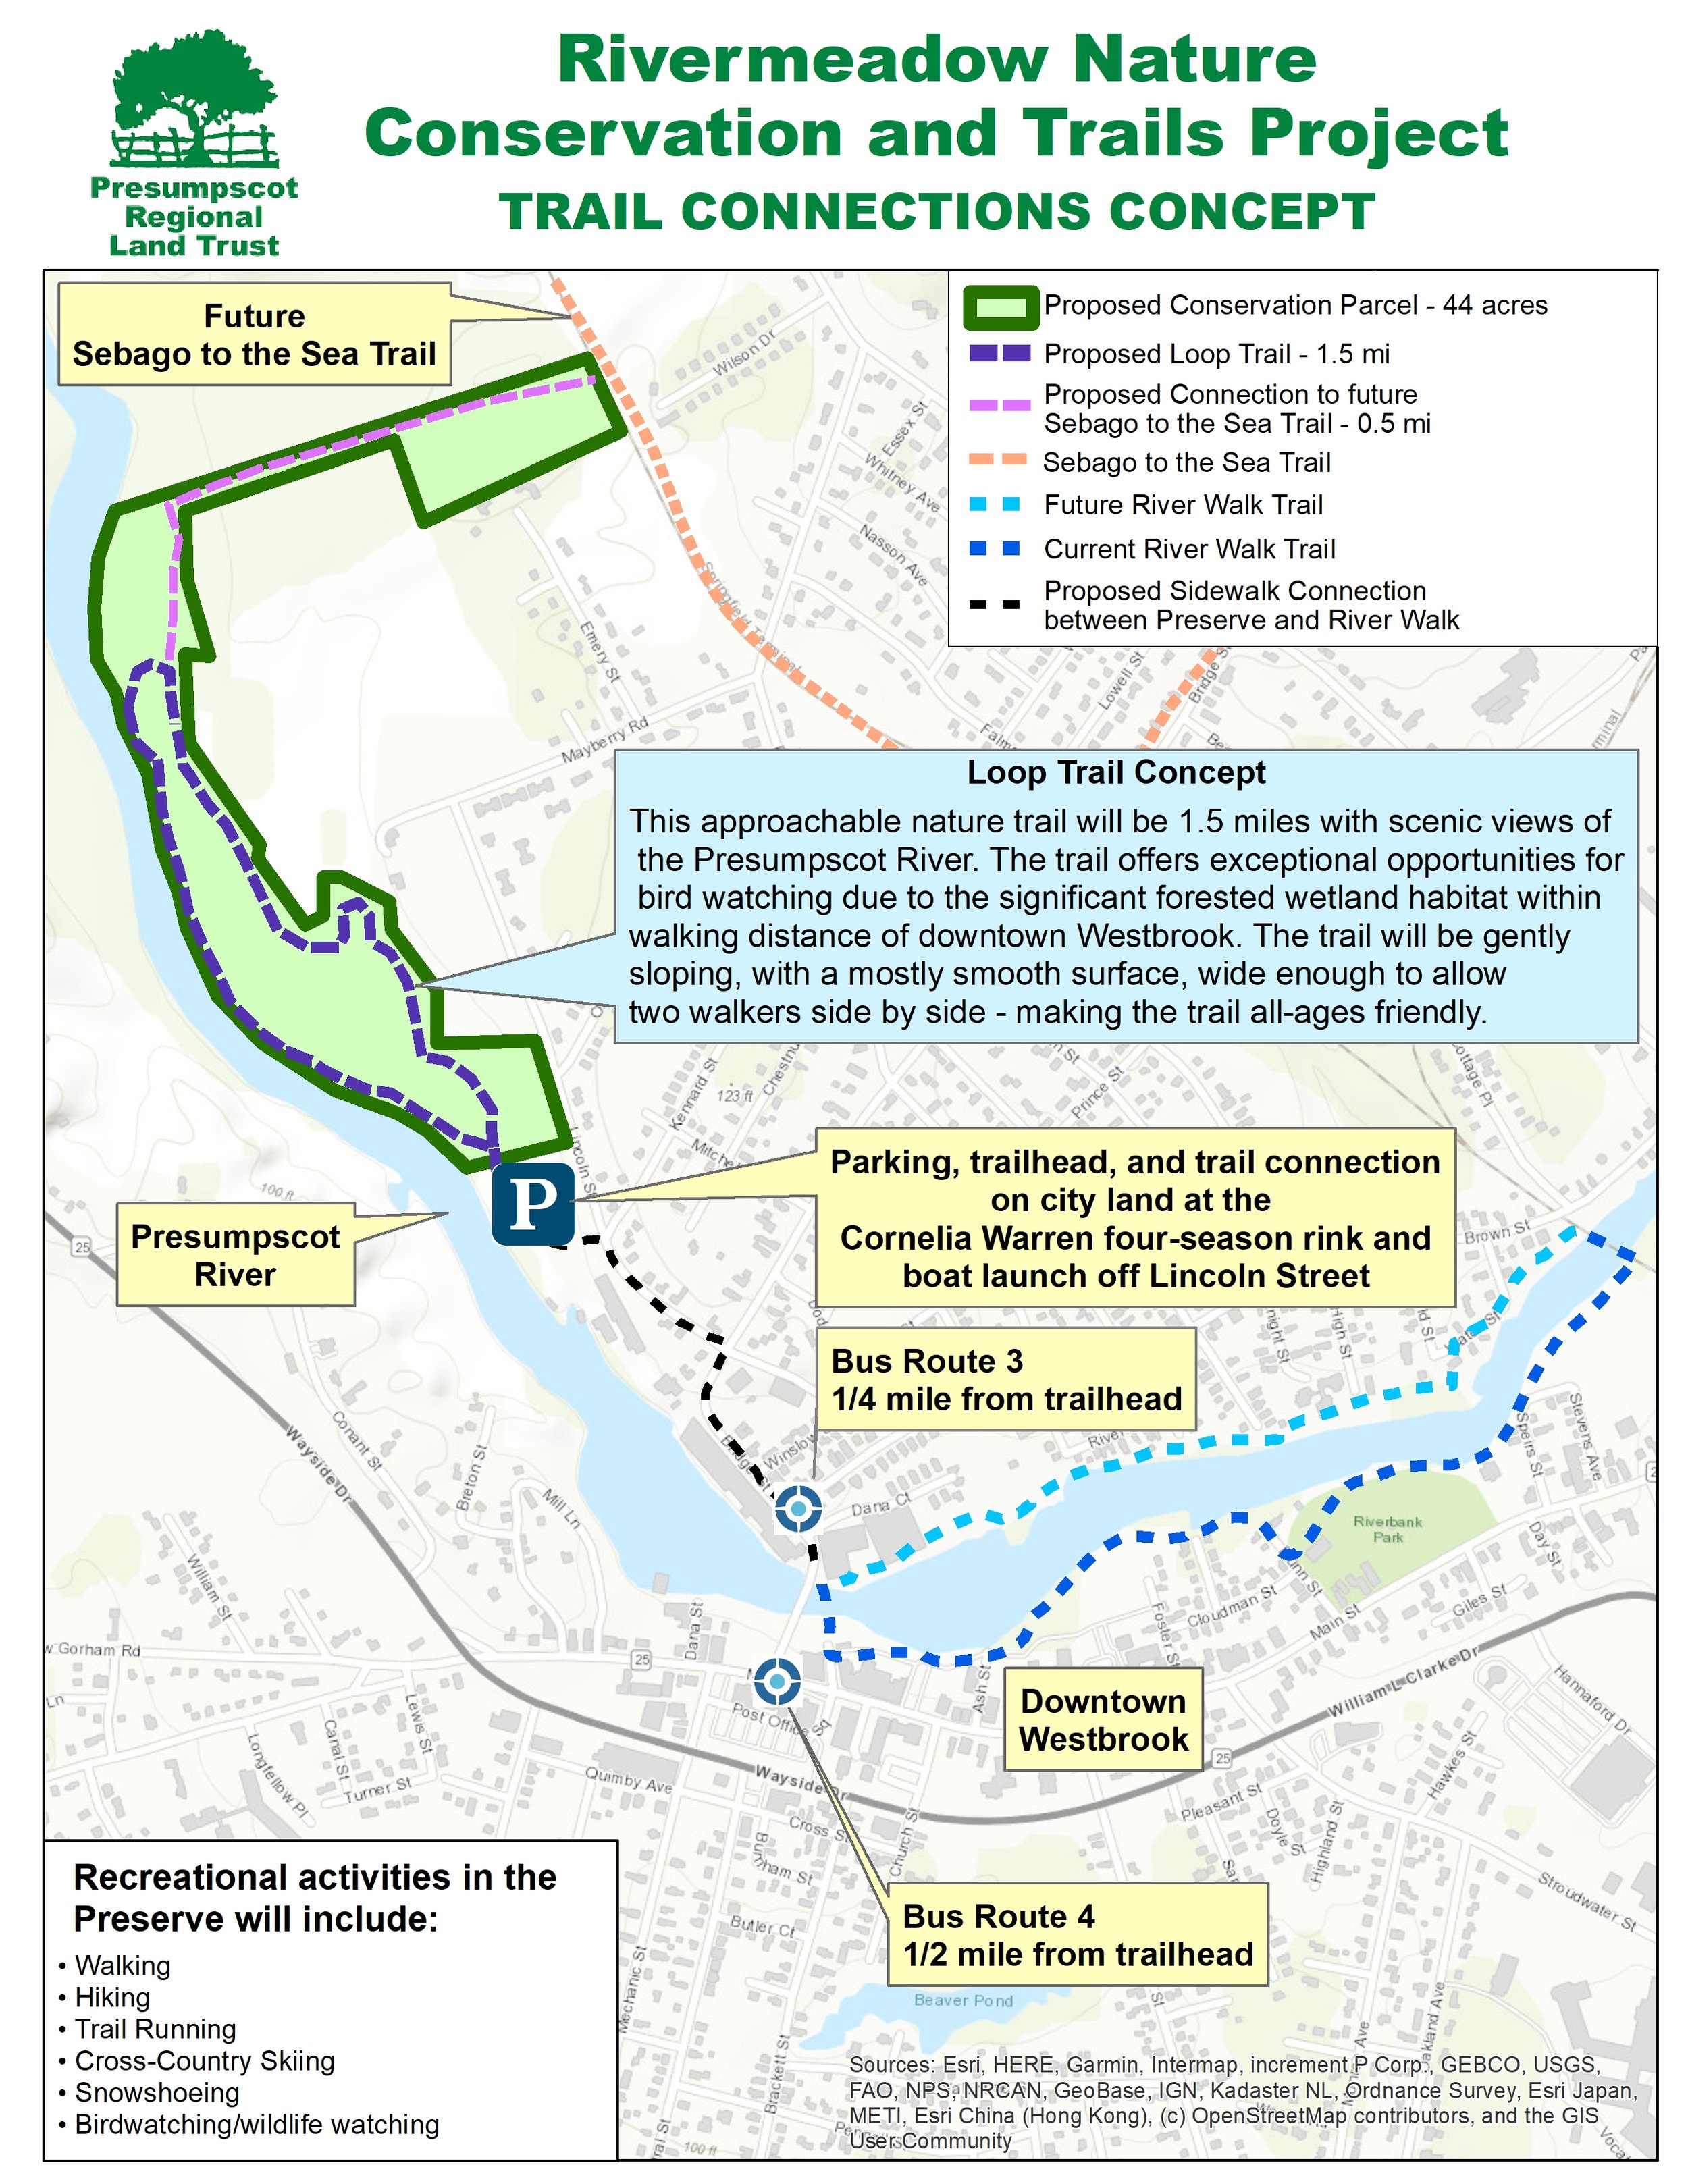 Rivermeadow Nature Conservation Project - Trail Connections.jpg